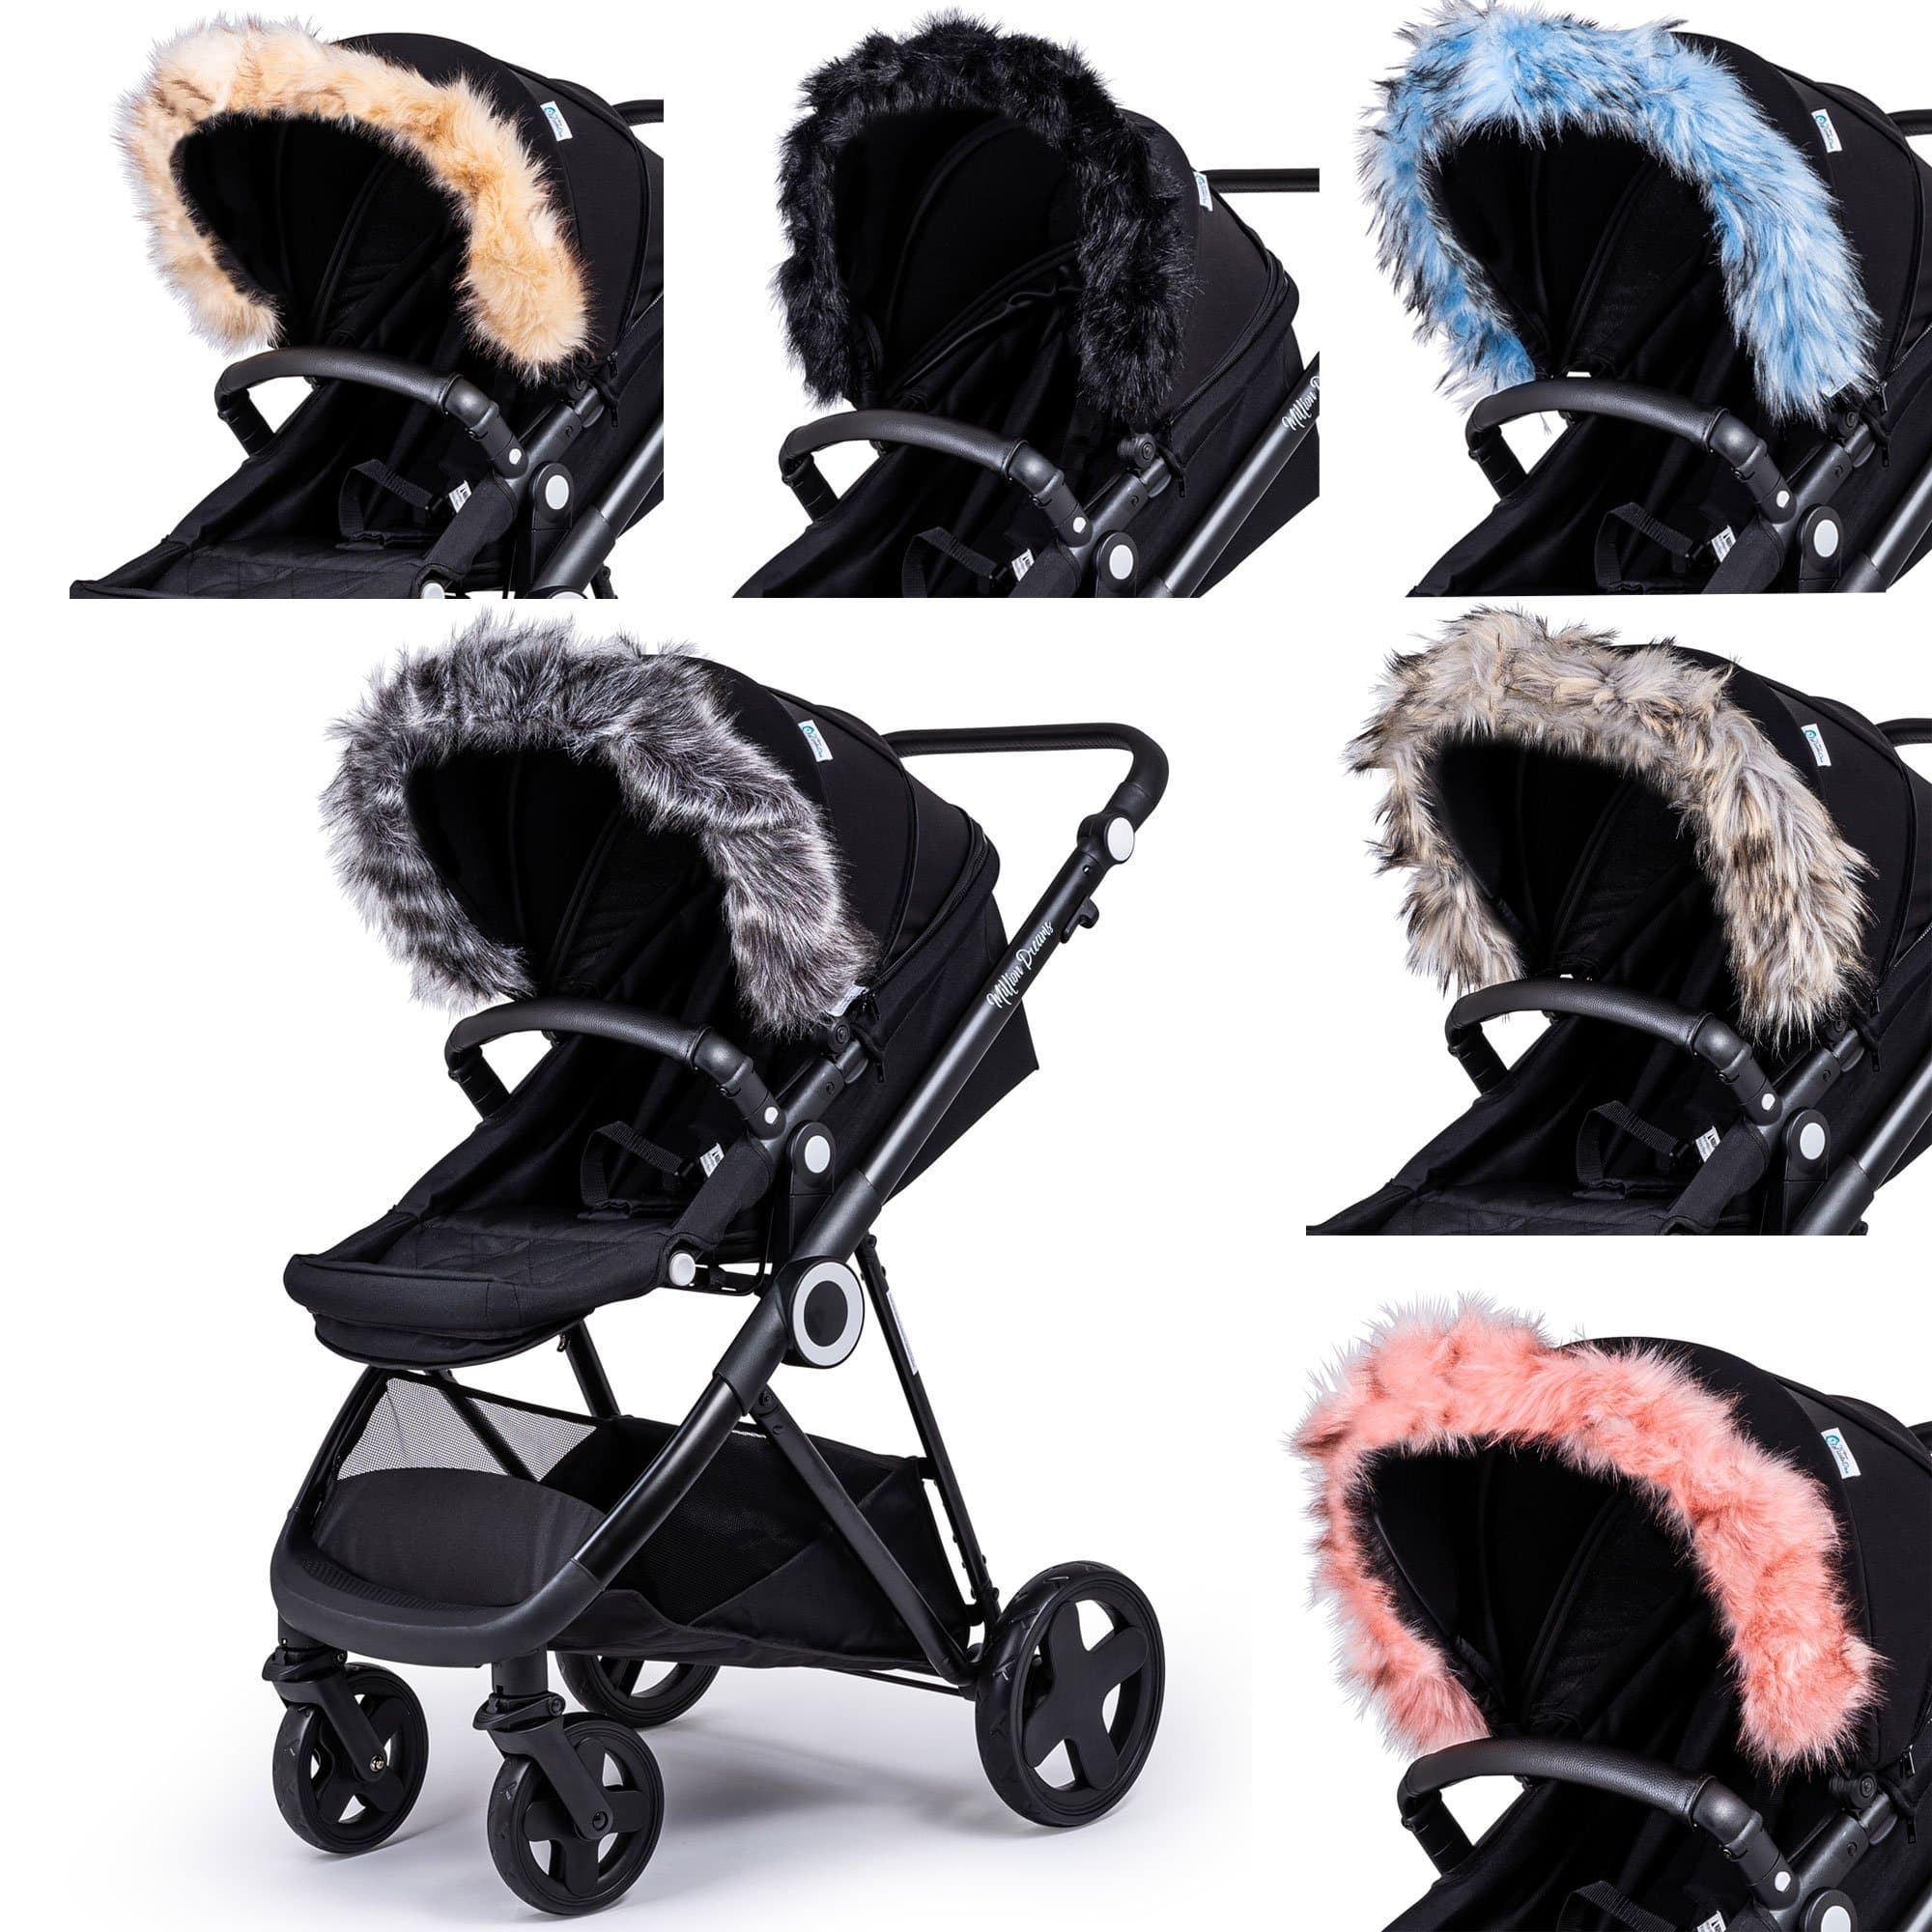 Pram Fur Hood Trim Attachment for Pushchair Compatible with Silver Cross - For Your Little One